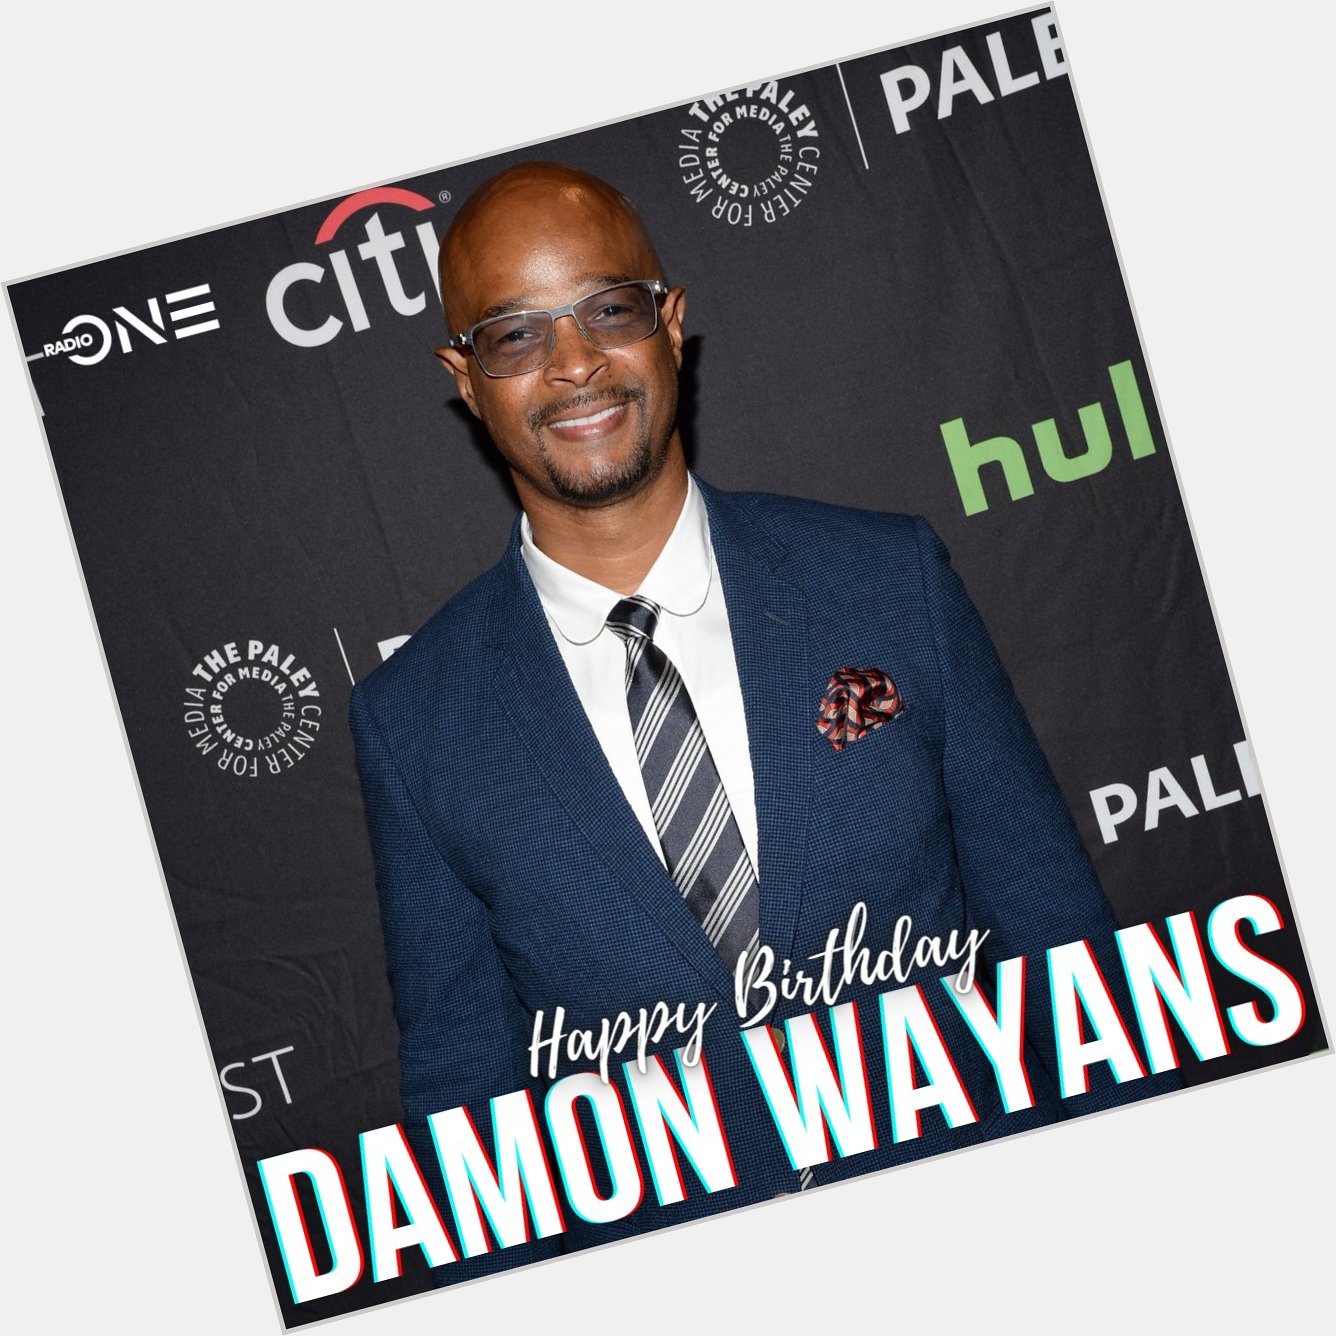 Happy 61st birthday to a comedy legend, actor and writer Damon Wayans!  